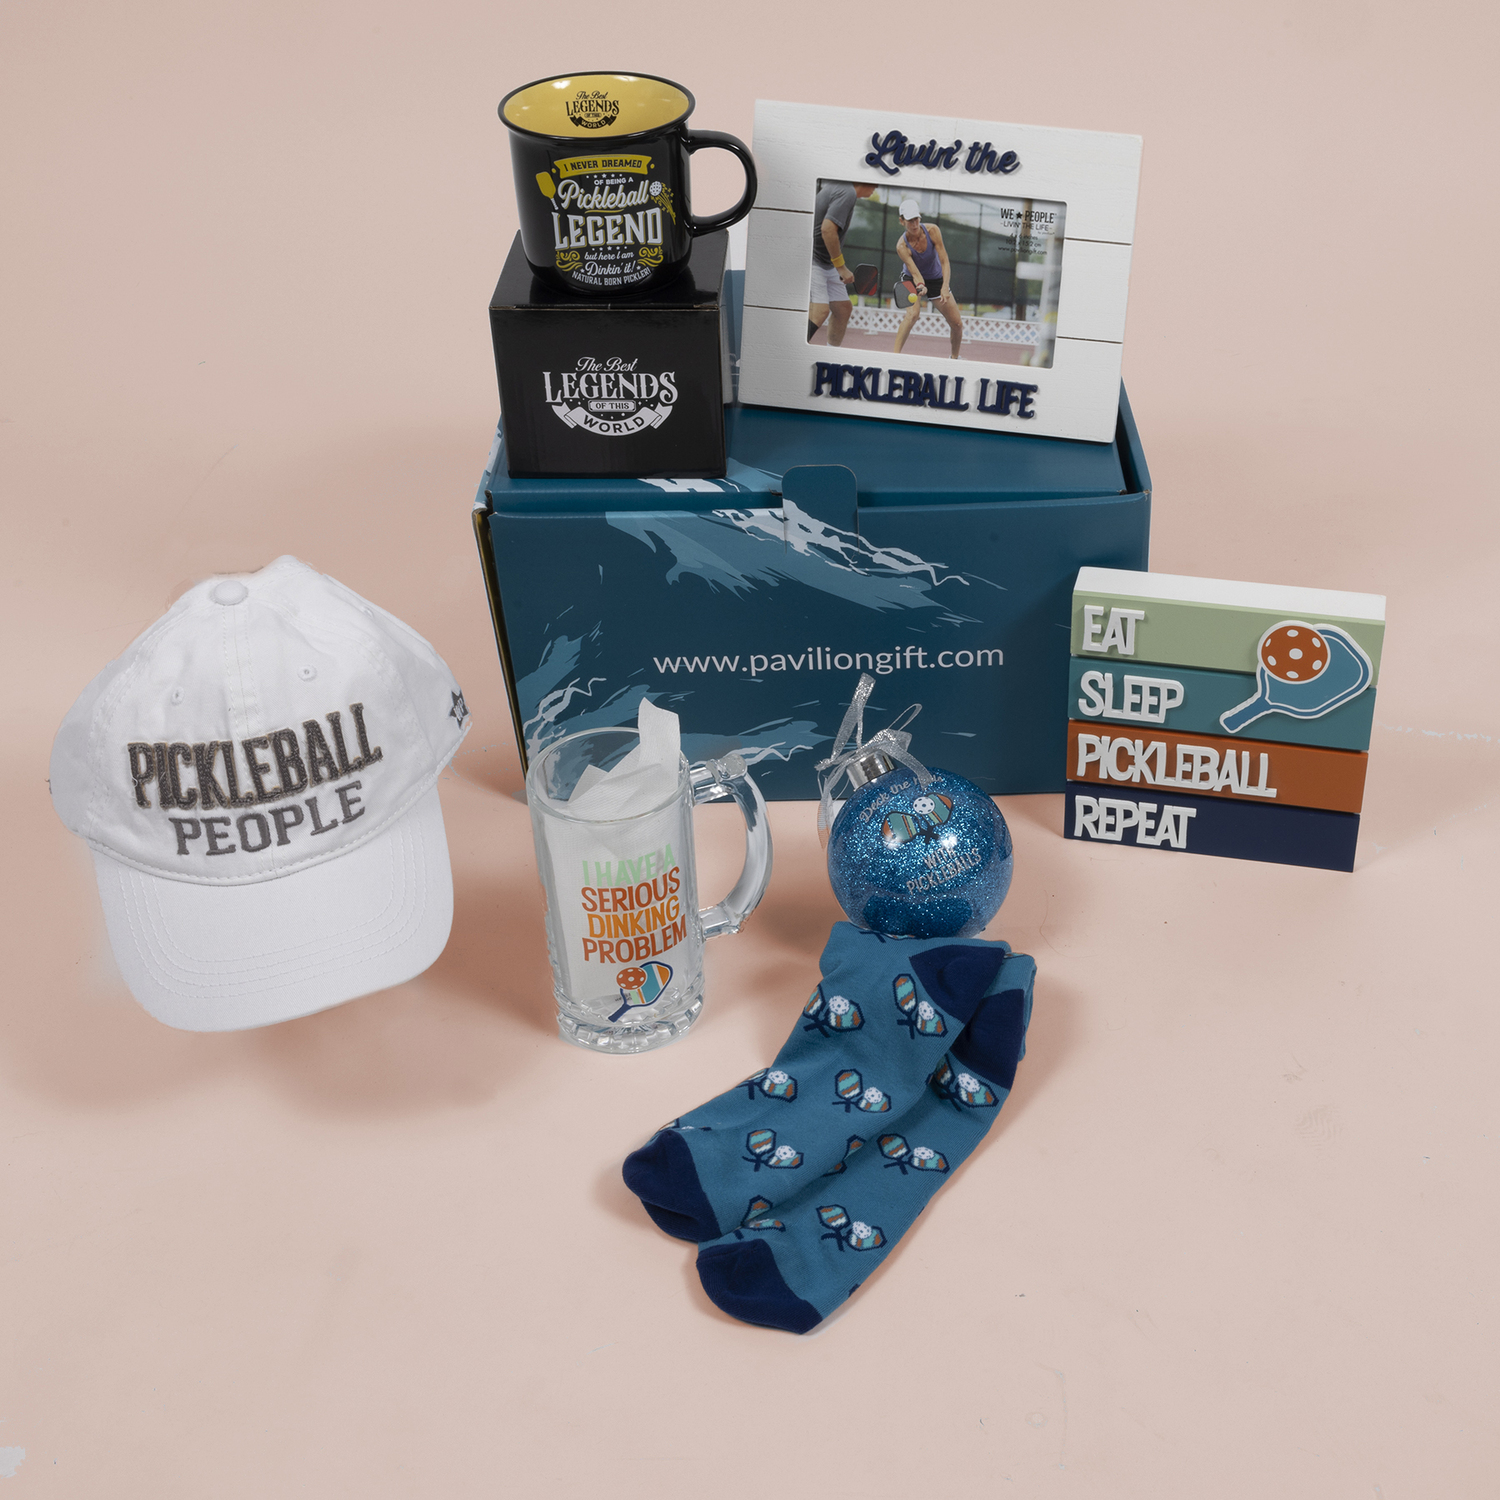  Pickleball Gift Box by Packaged With Positivity -  Pickleball Gift Box - $95.00 Value